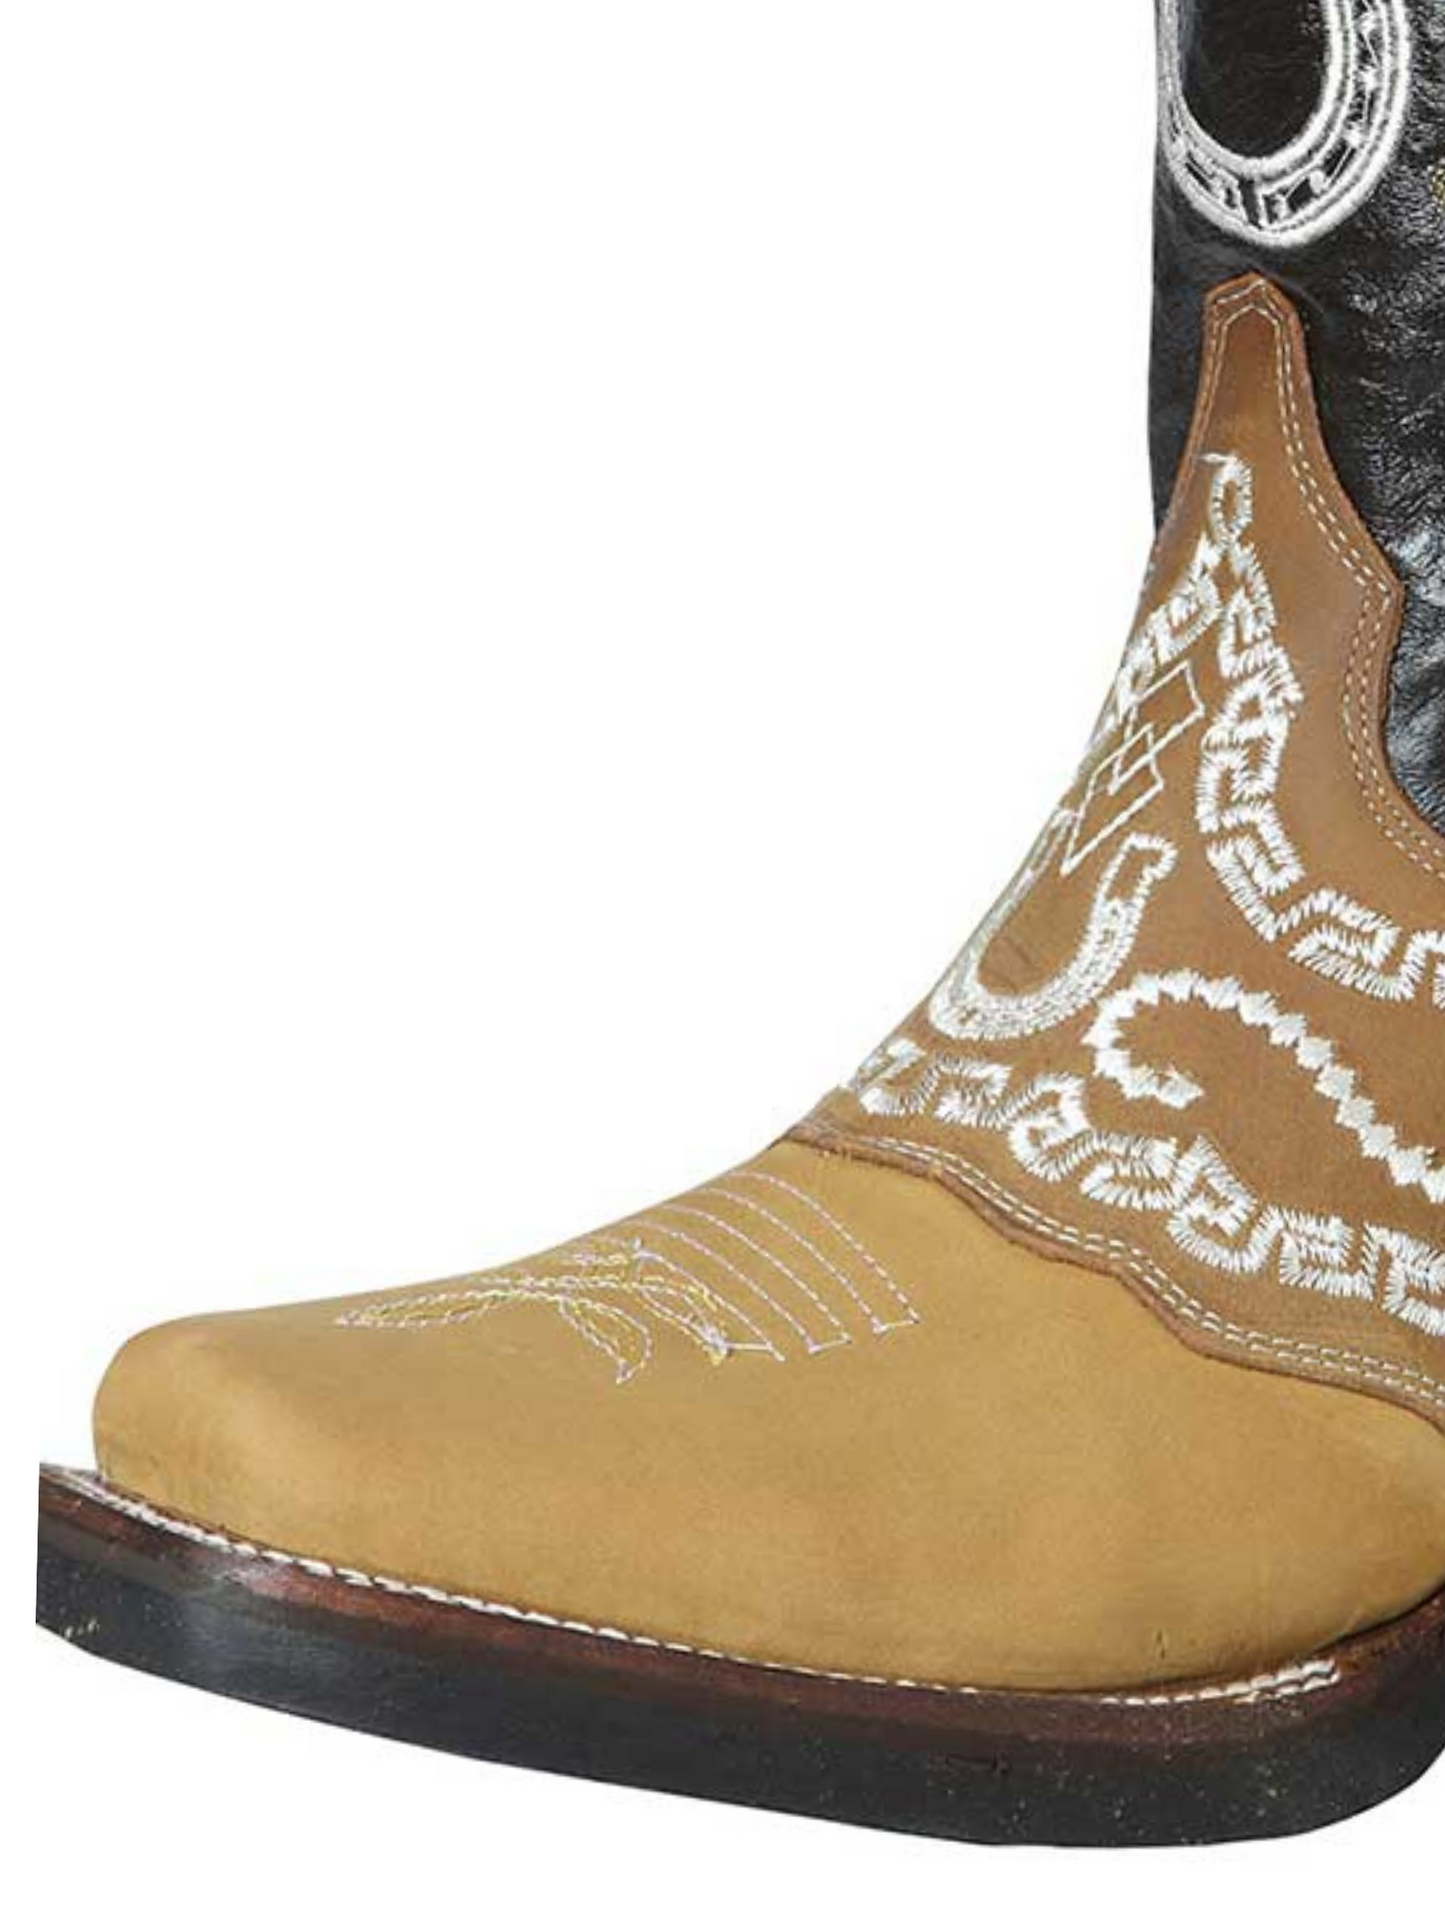 Rodeo Cowboy Boots with Embroidered Nubuck Leather Mask for Men 'El General' - ID: 51111